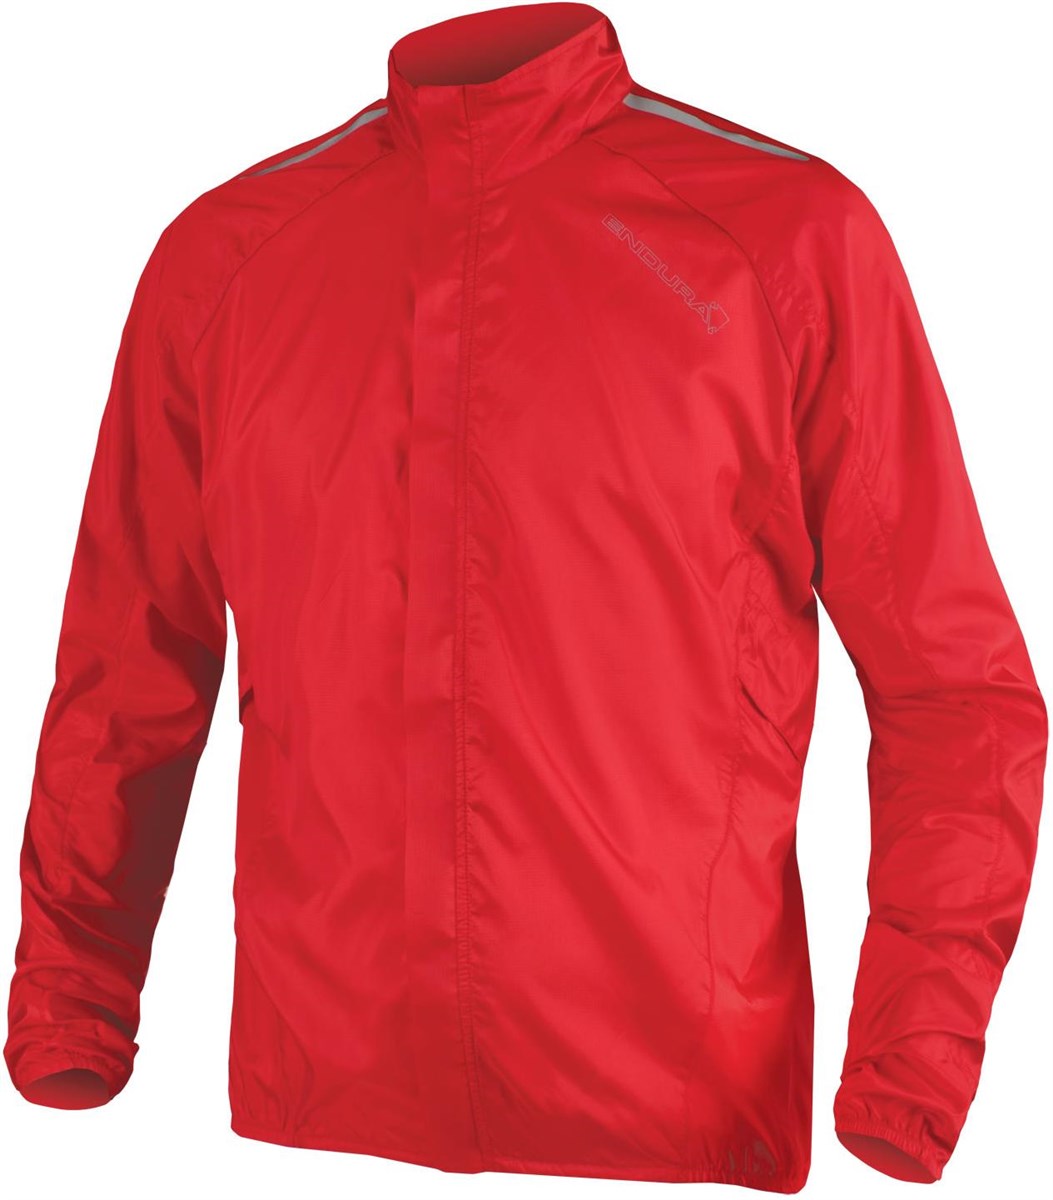 Endura Pakajak Packable Windproof Cycling Jacket SS16 product image